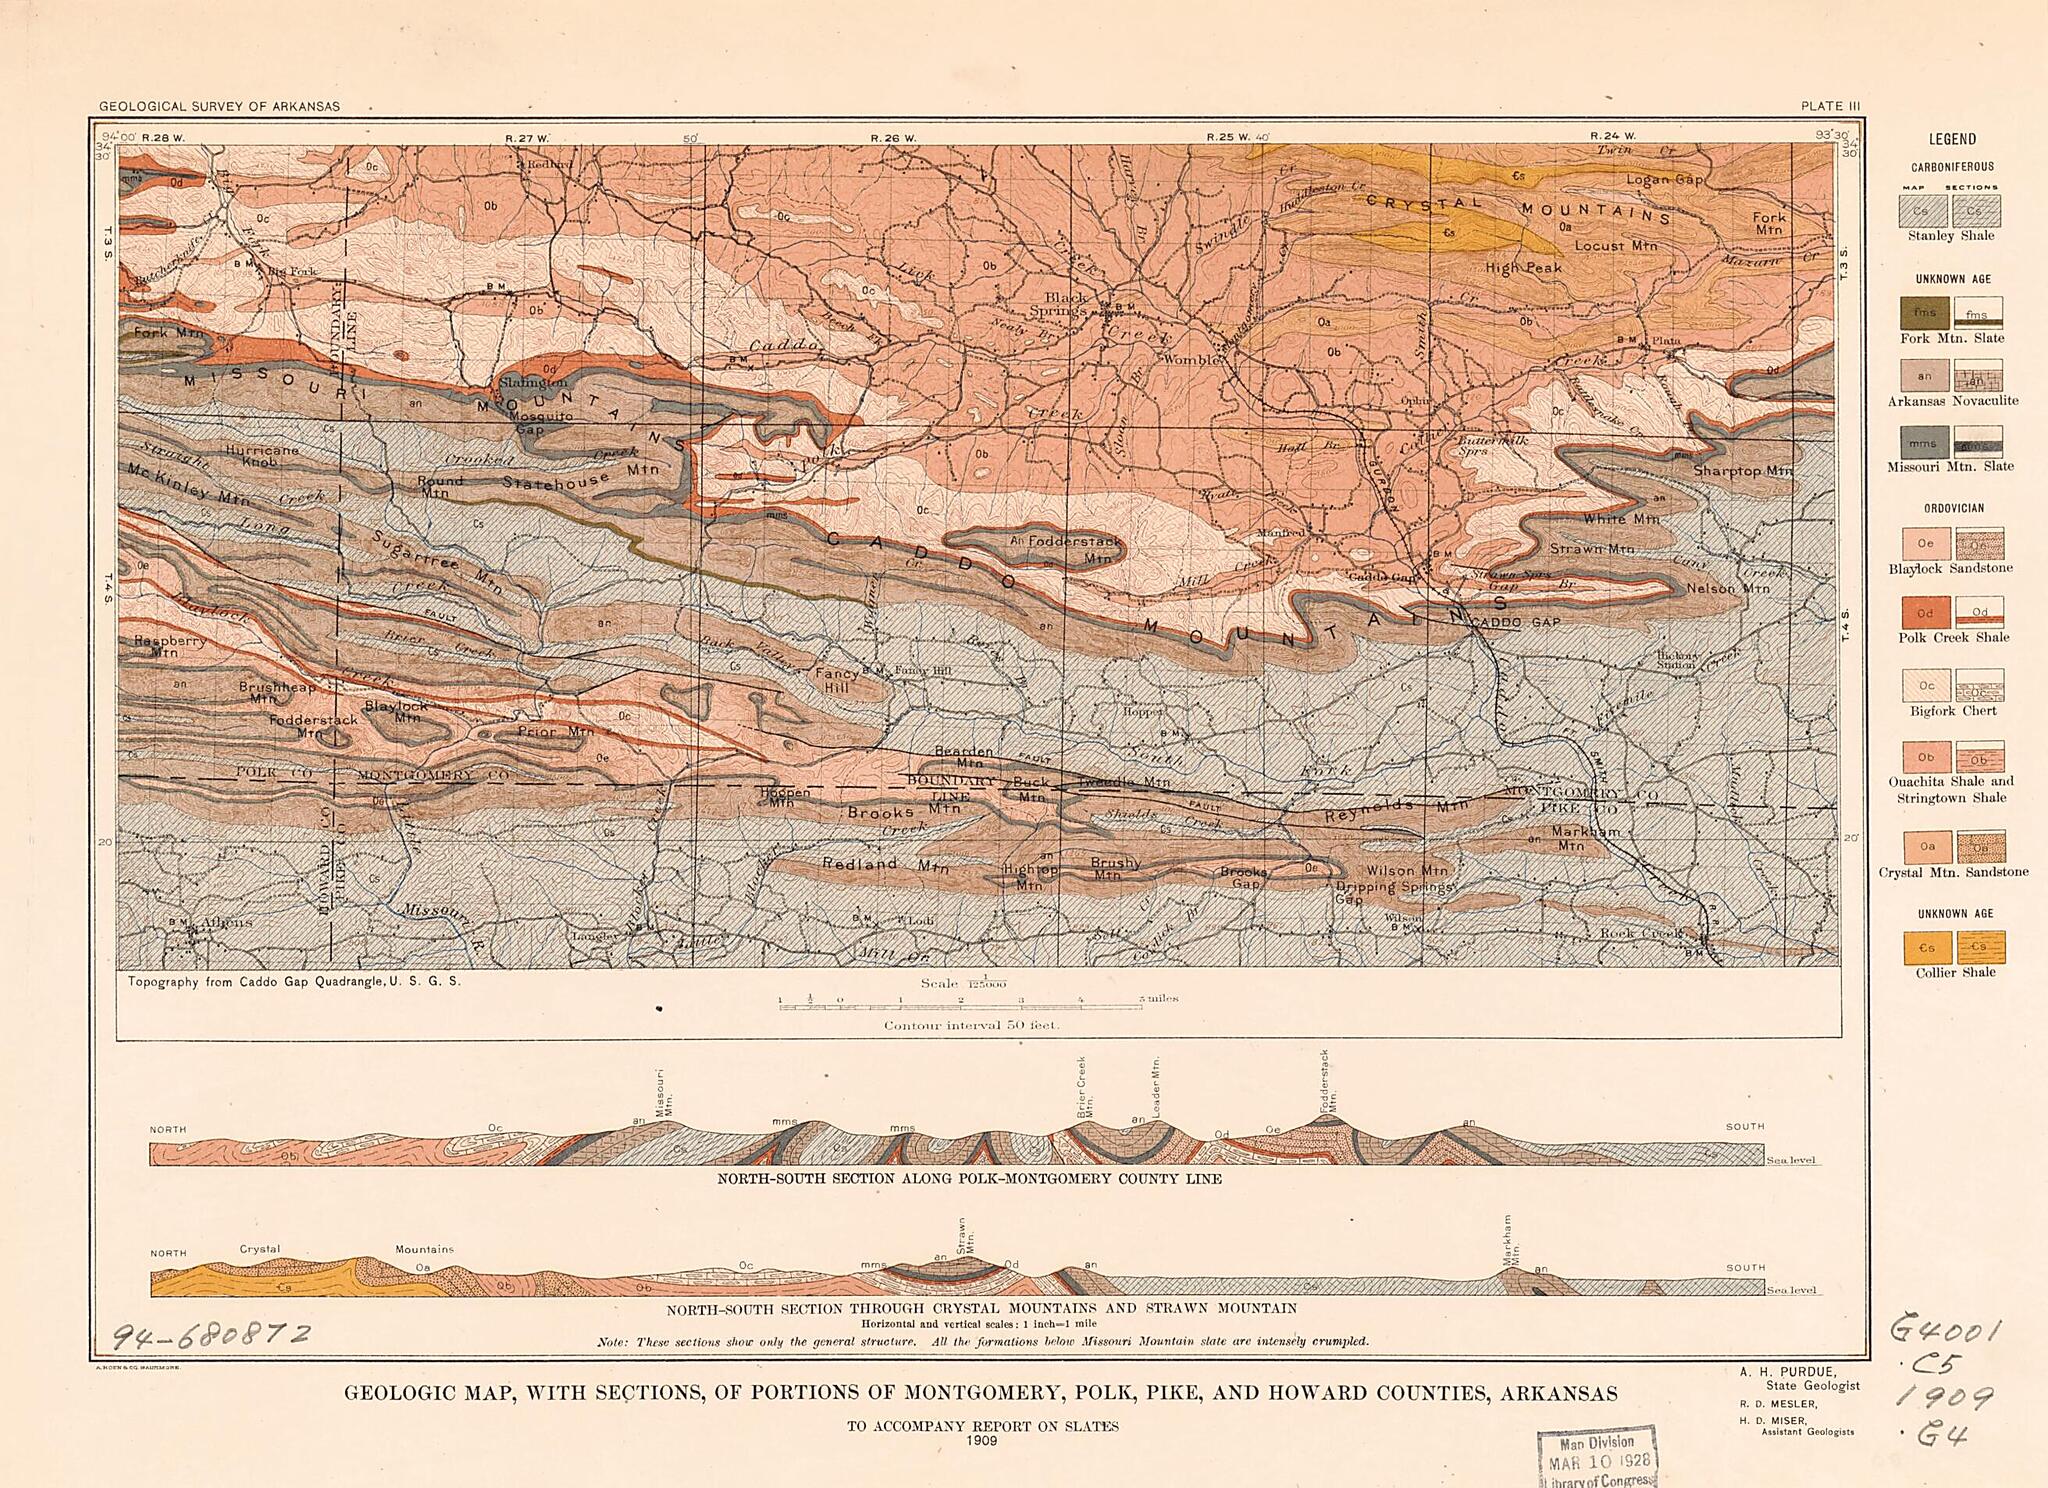 This old map of Geologic Map, With Sections, of Portions of Montgomery, Polk, Pike, and Howard Counties, Arkansas from 1909 was created by  Geological Survey of Arkansas in 1909